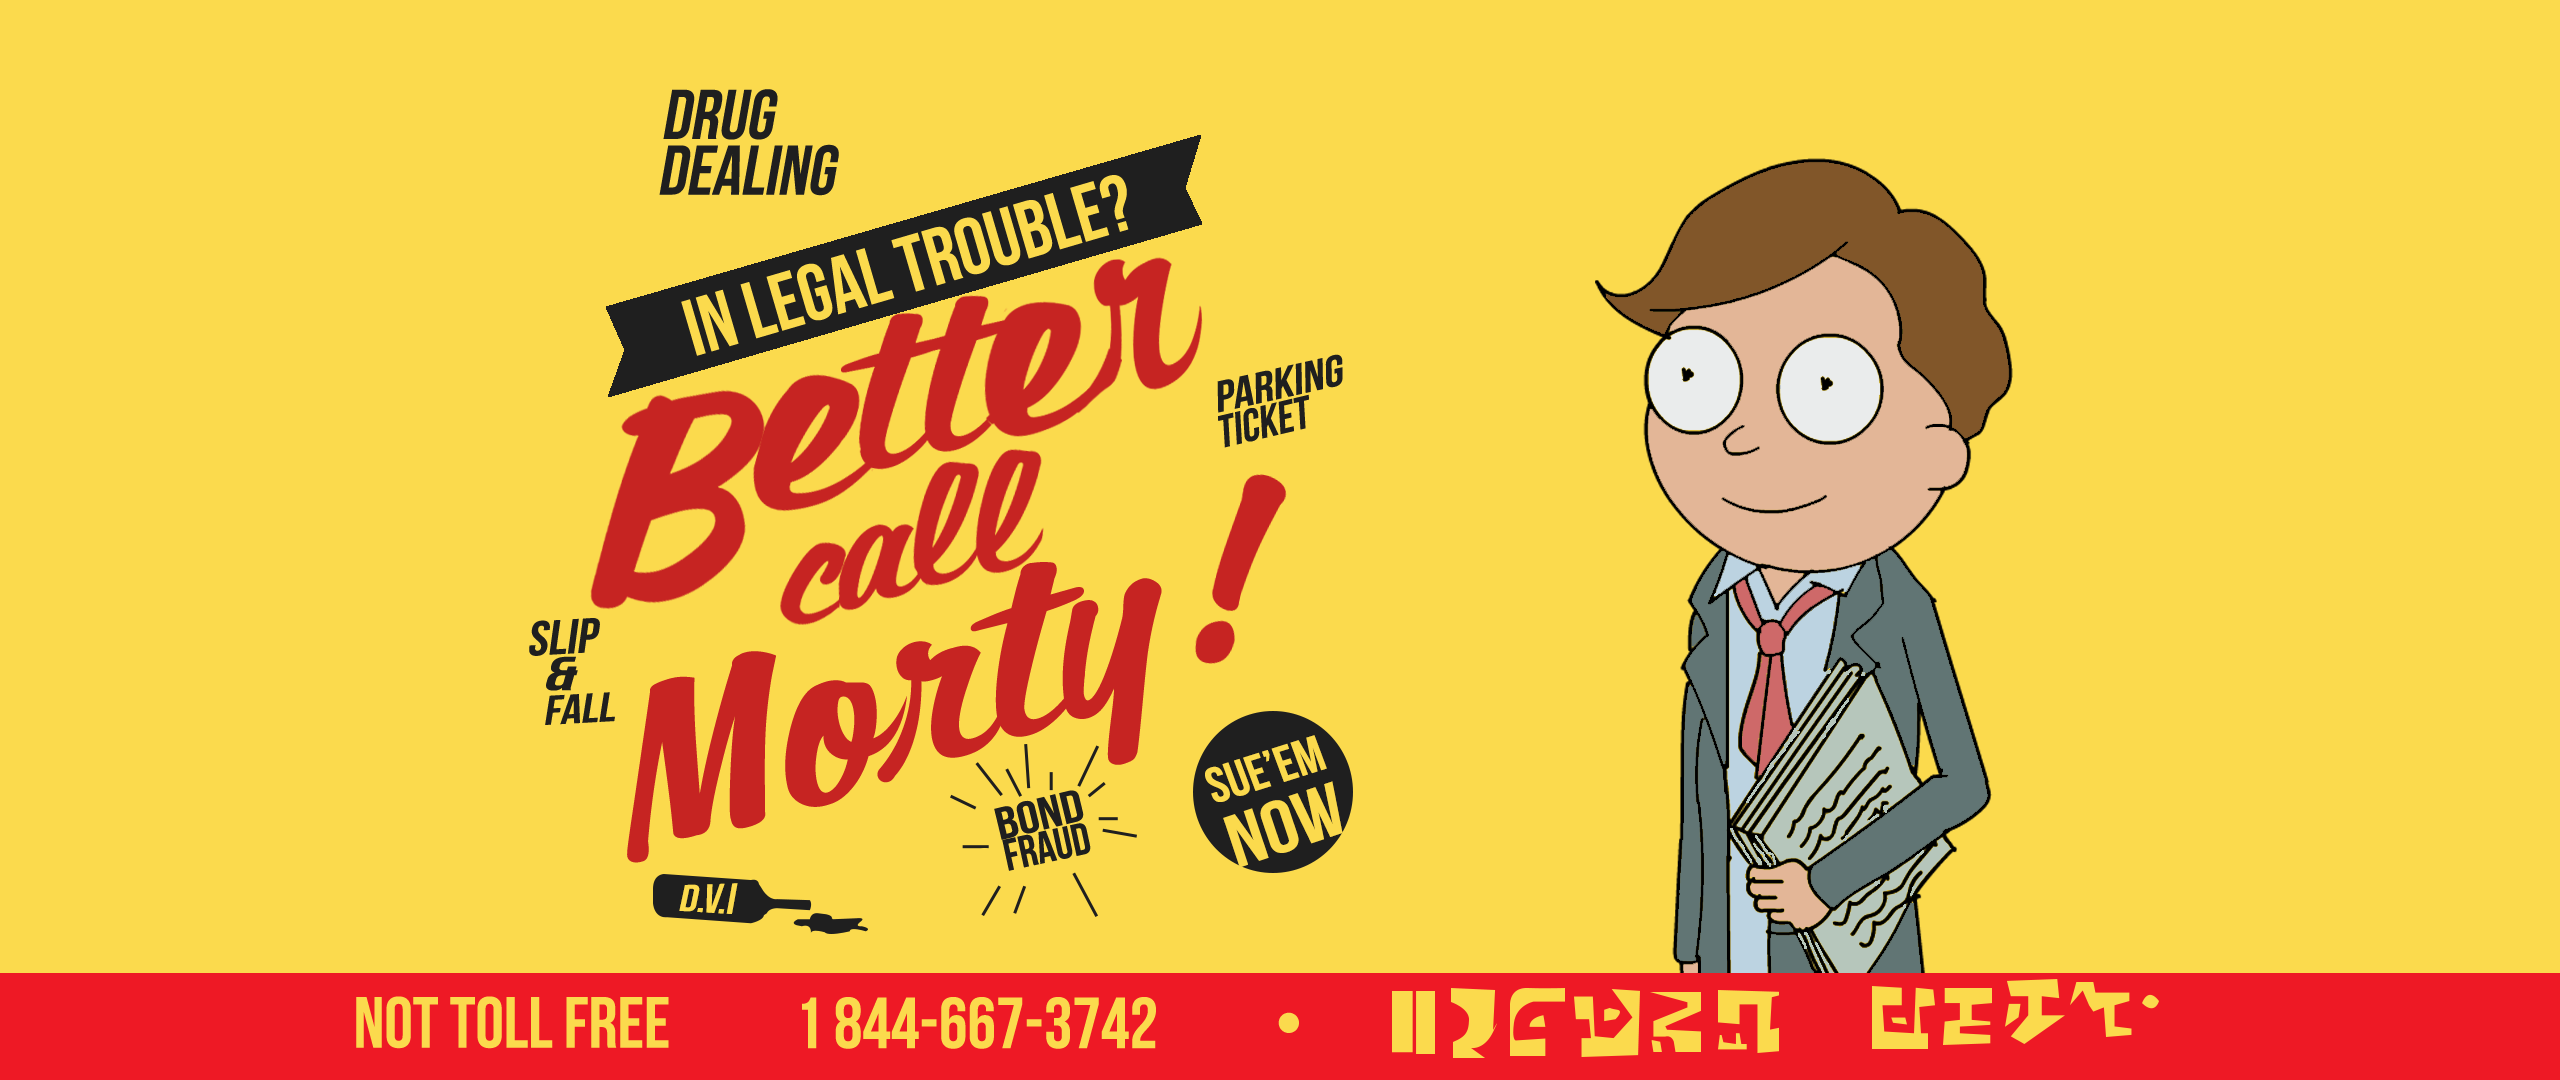 General 2560x1080 Rick and Morty Morty Smith typography TV series